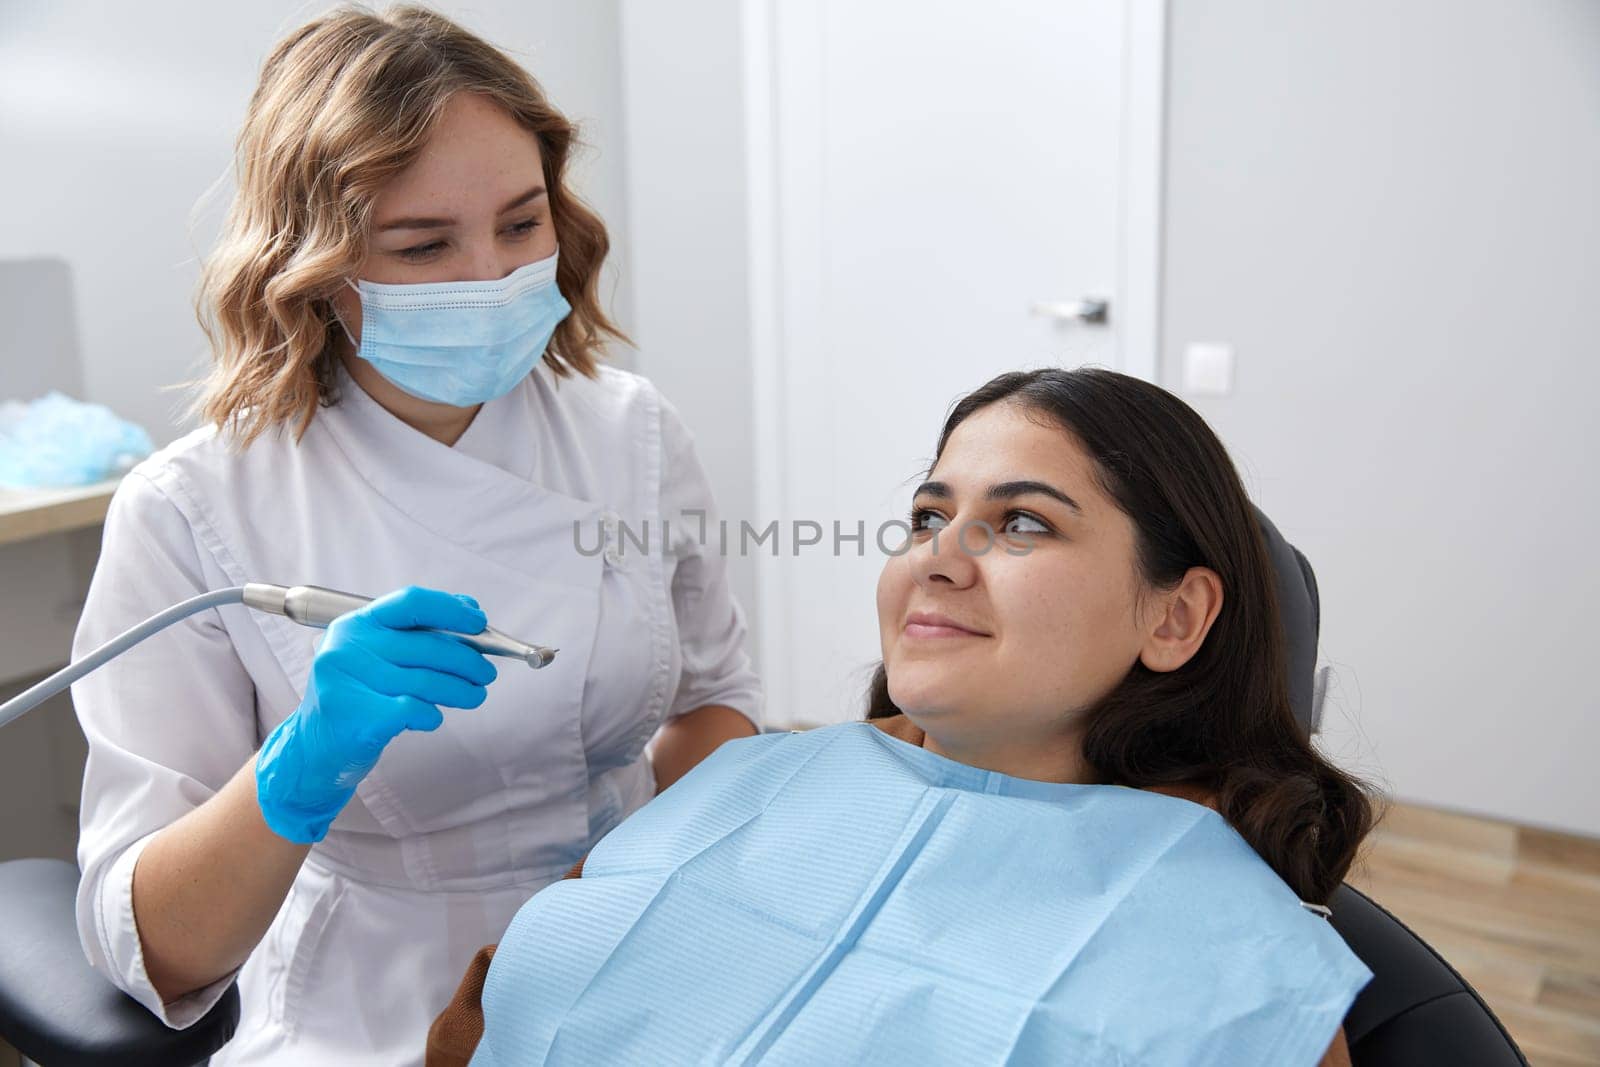 Dentist drilling tooth of female patient in dental chair by Mariakray